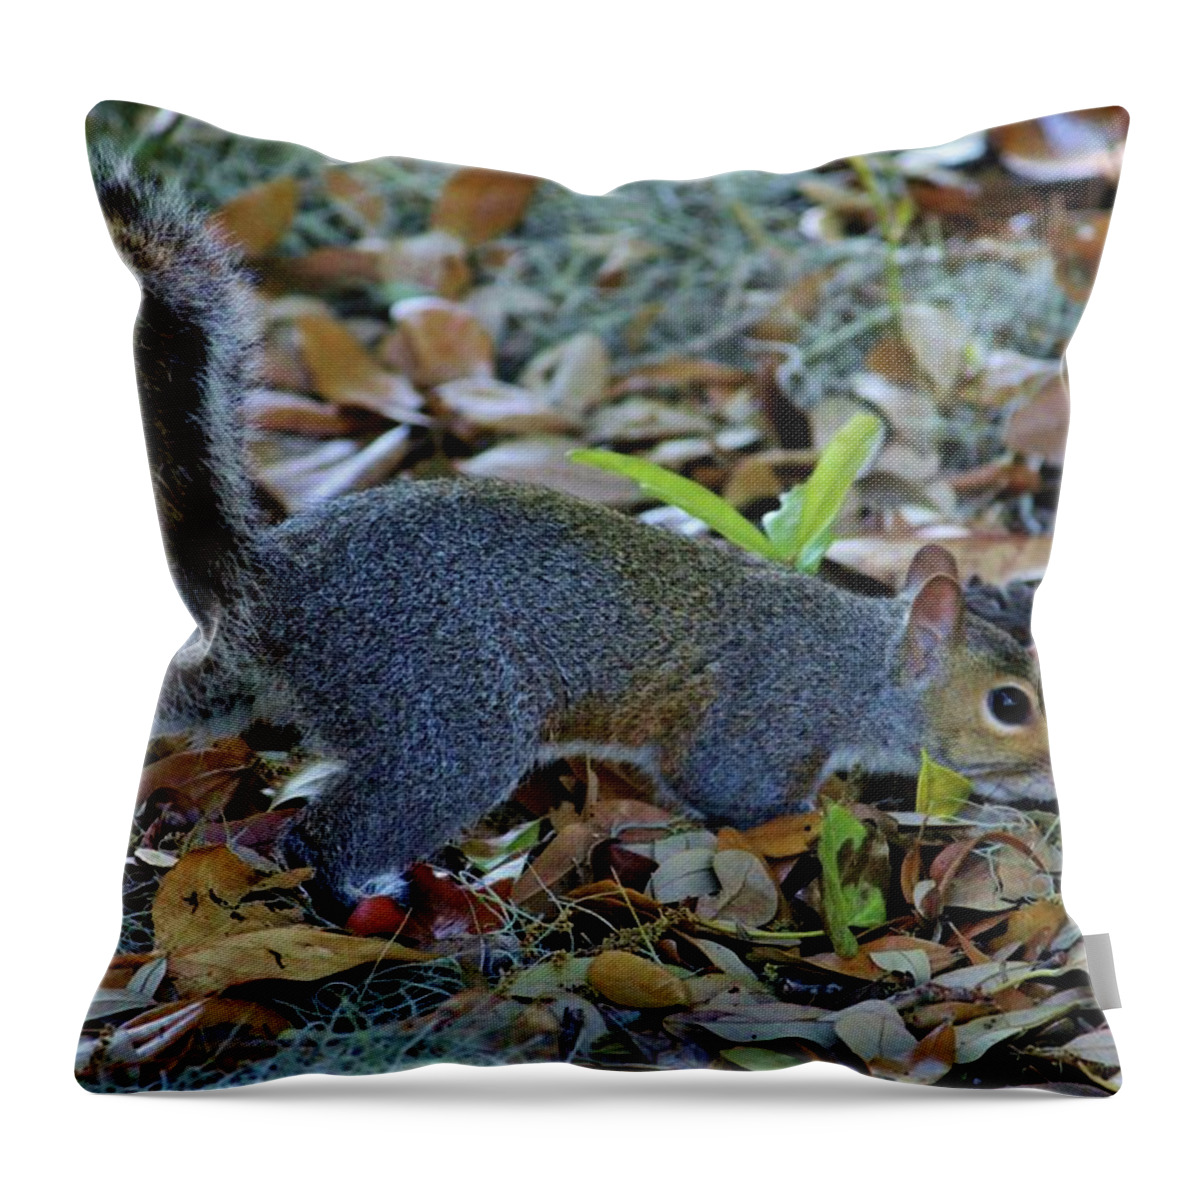 Wild Animal Throw Pillow featuring the photograph Searching For Food by Cynthia Guinn